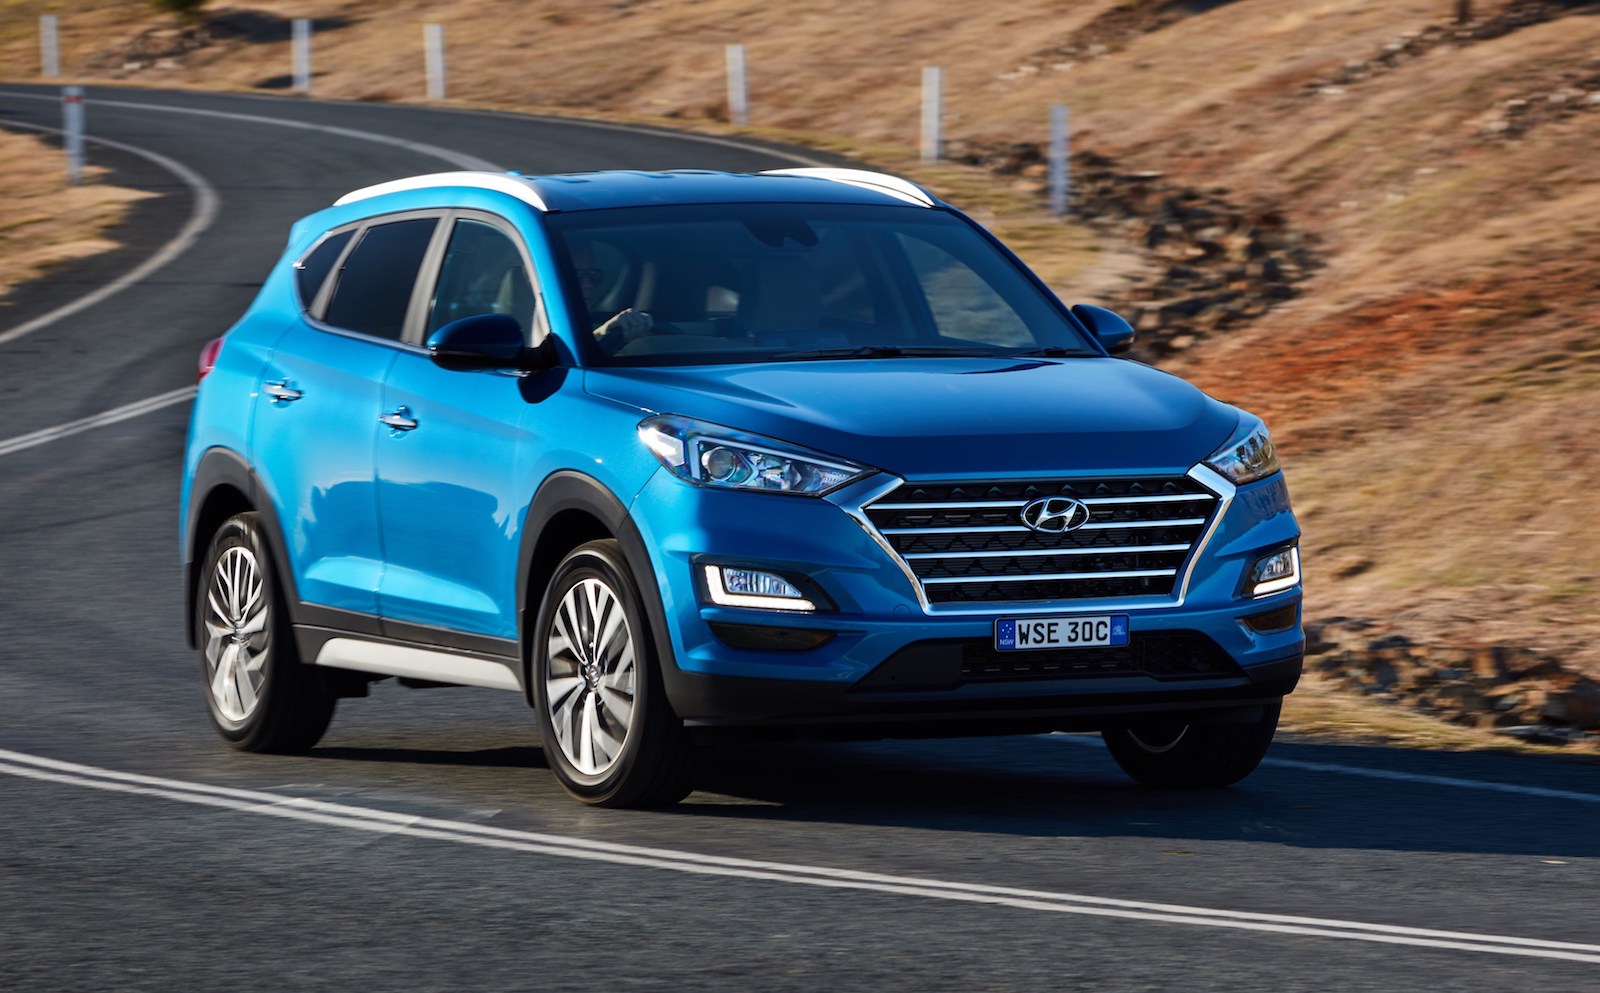 2019 Hyundai Tucson now on sale in Australia from $28,150